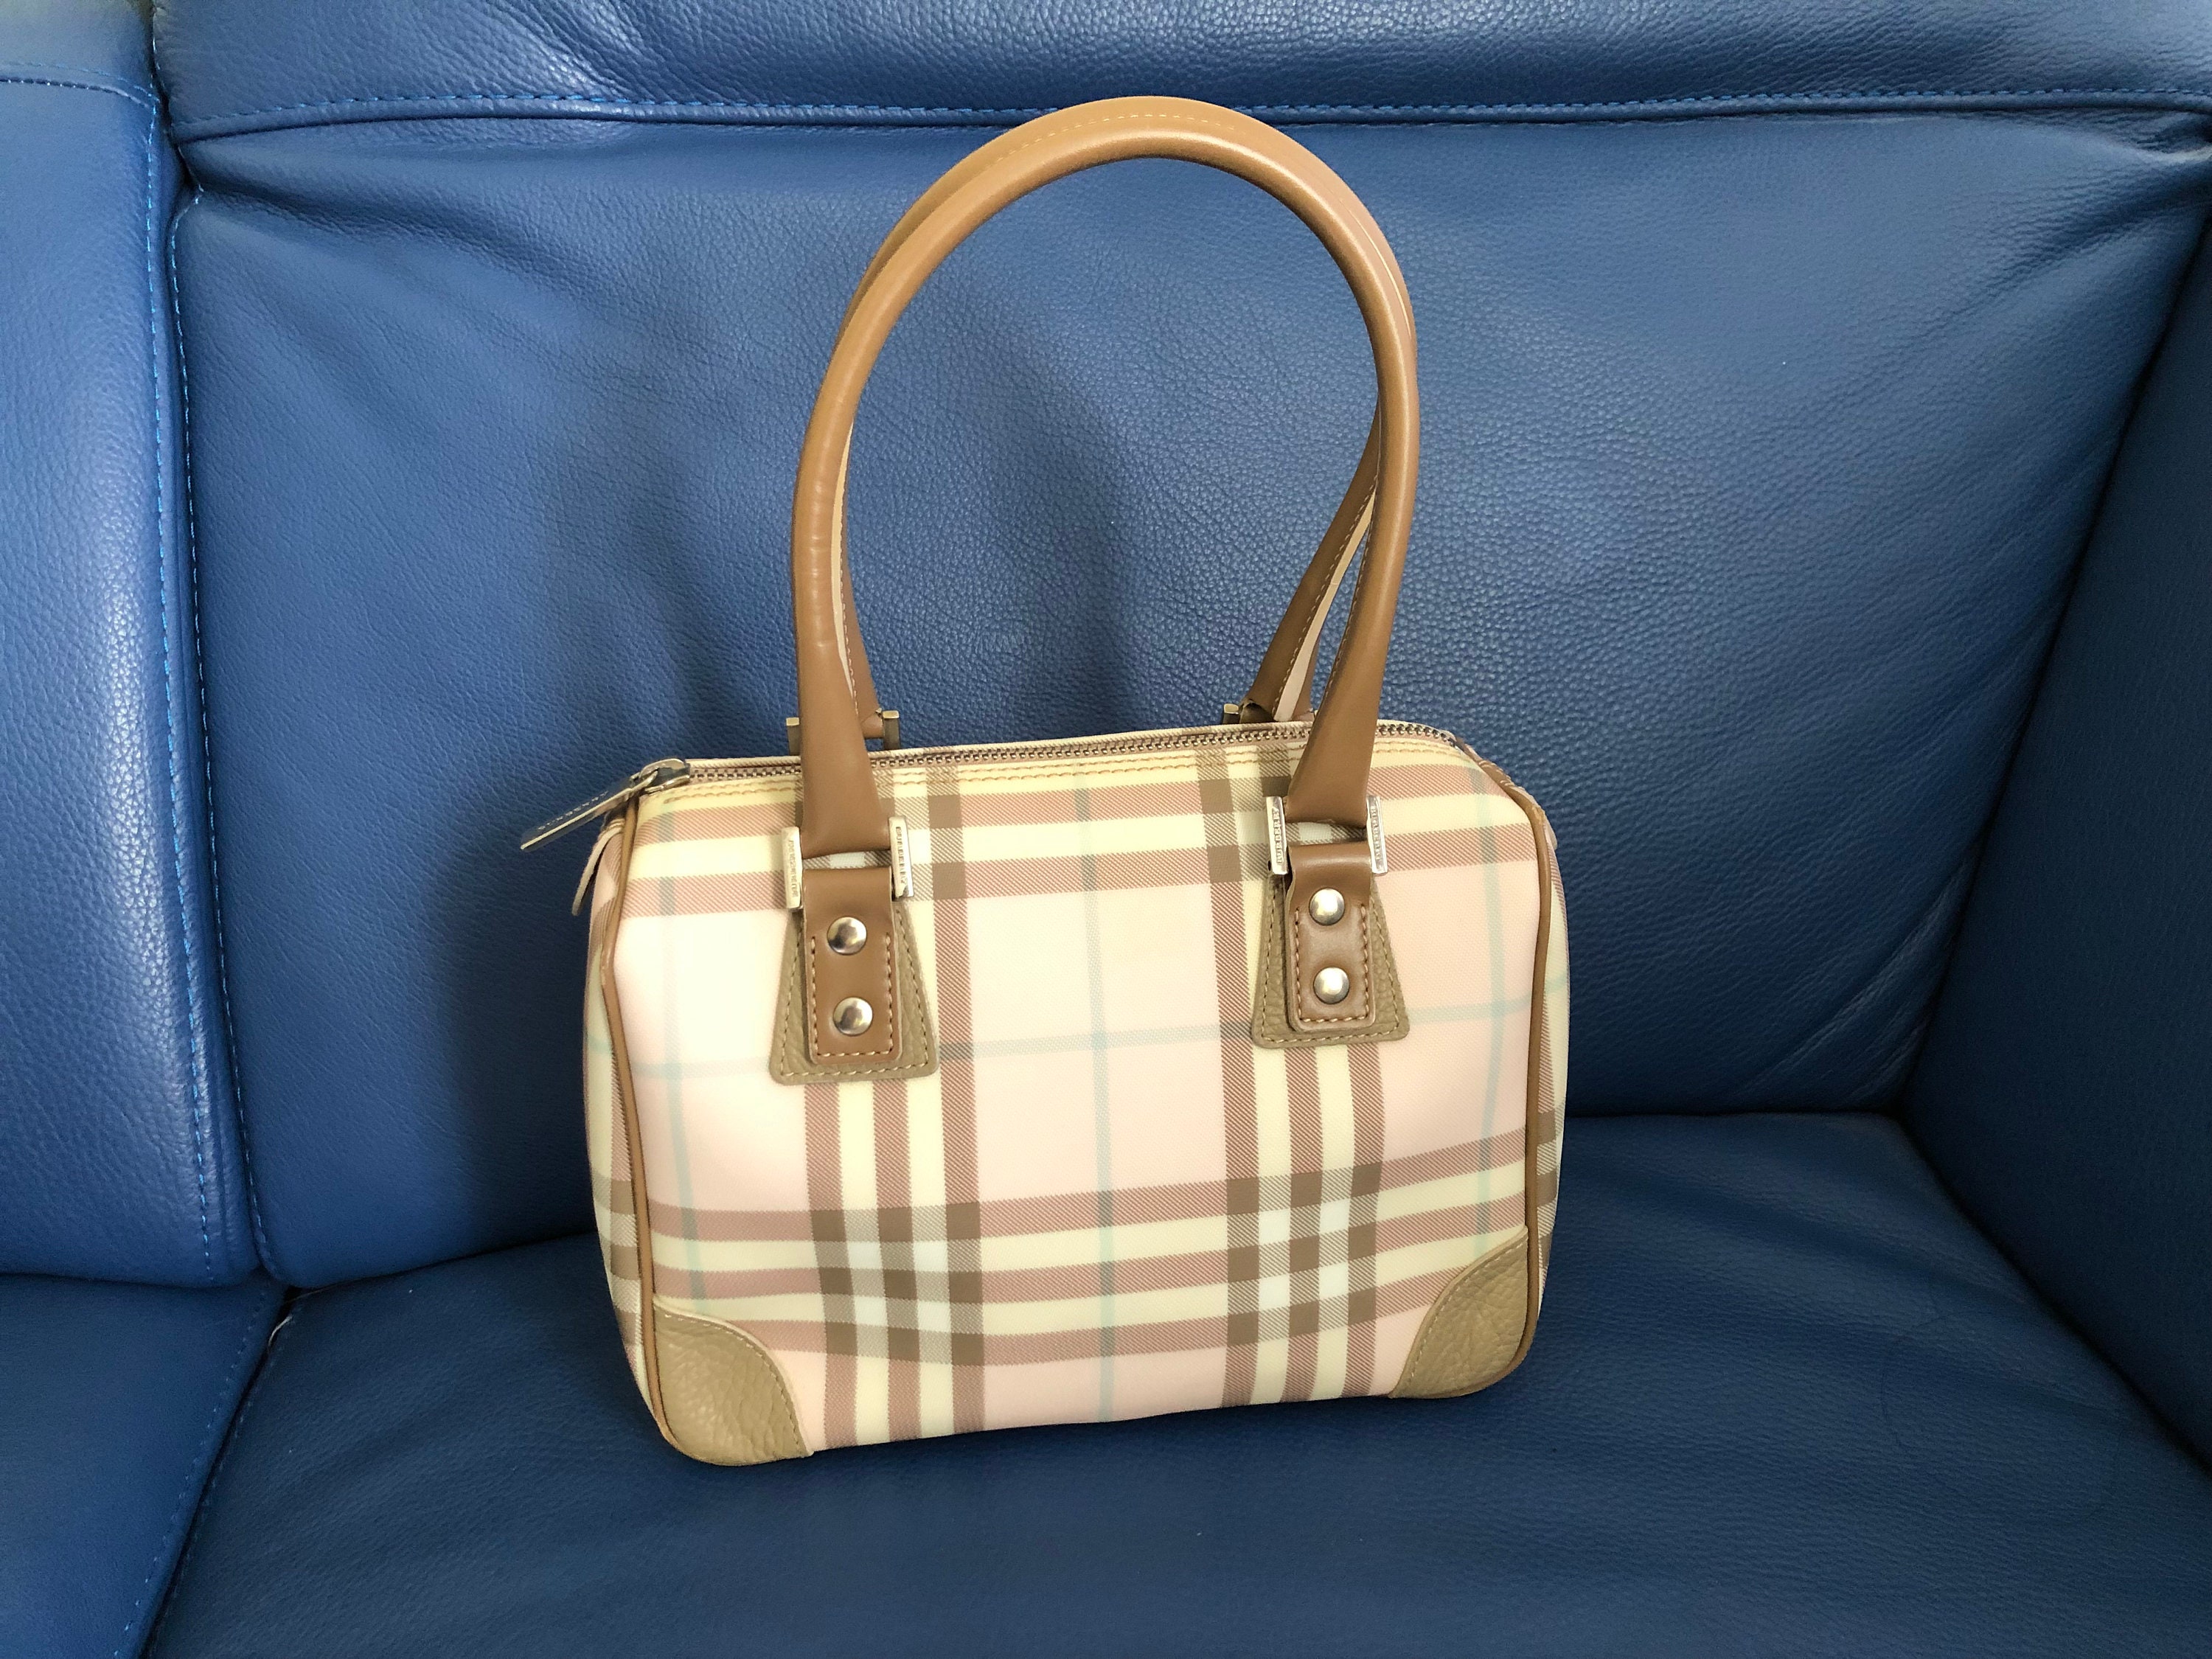 Burberry, Bags, Authentic Burberry Bag